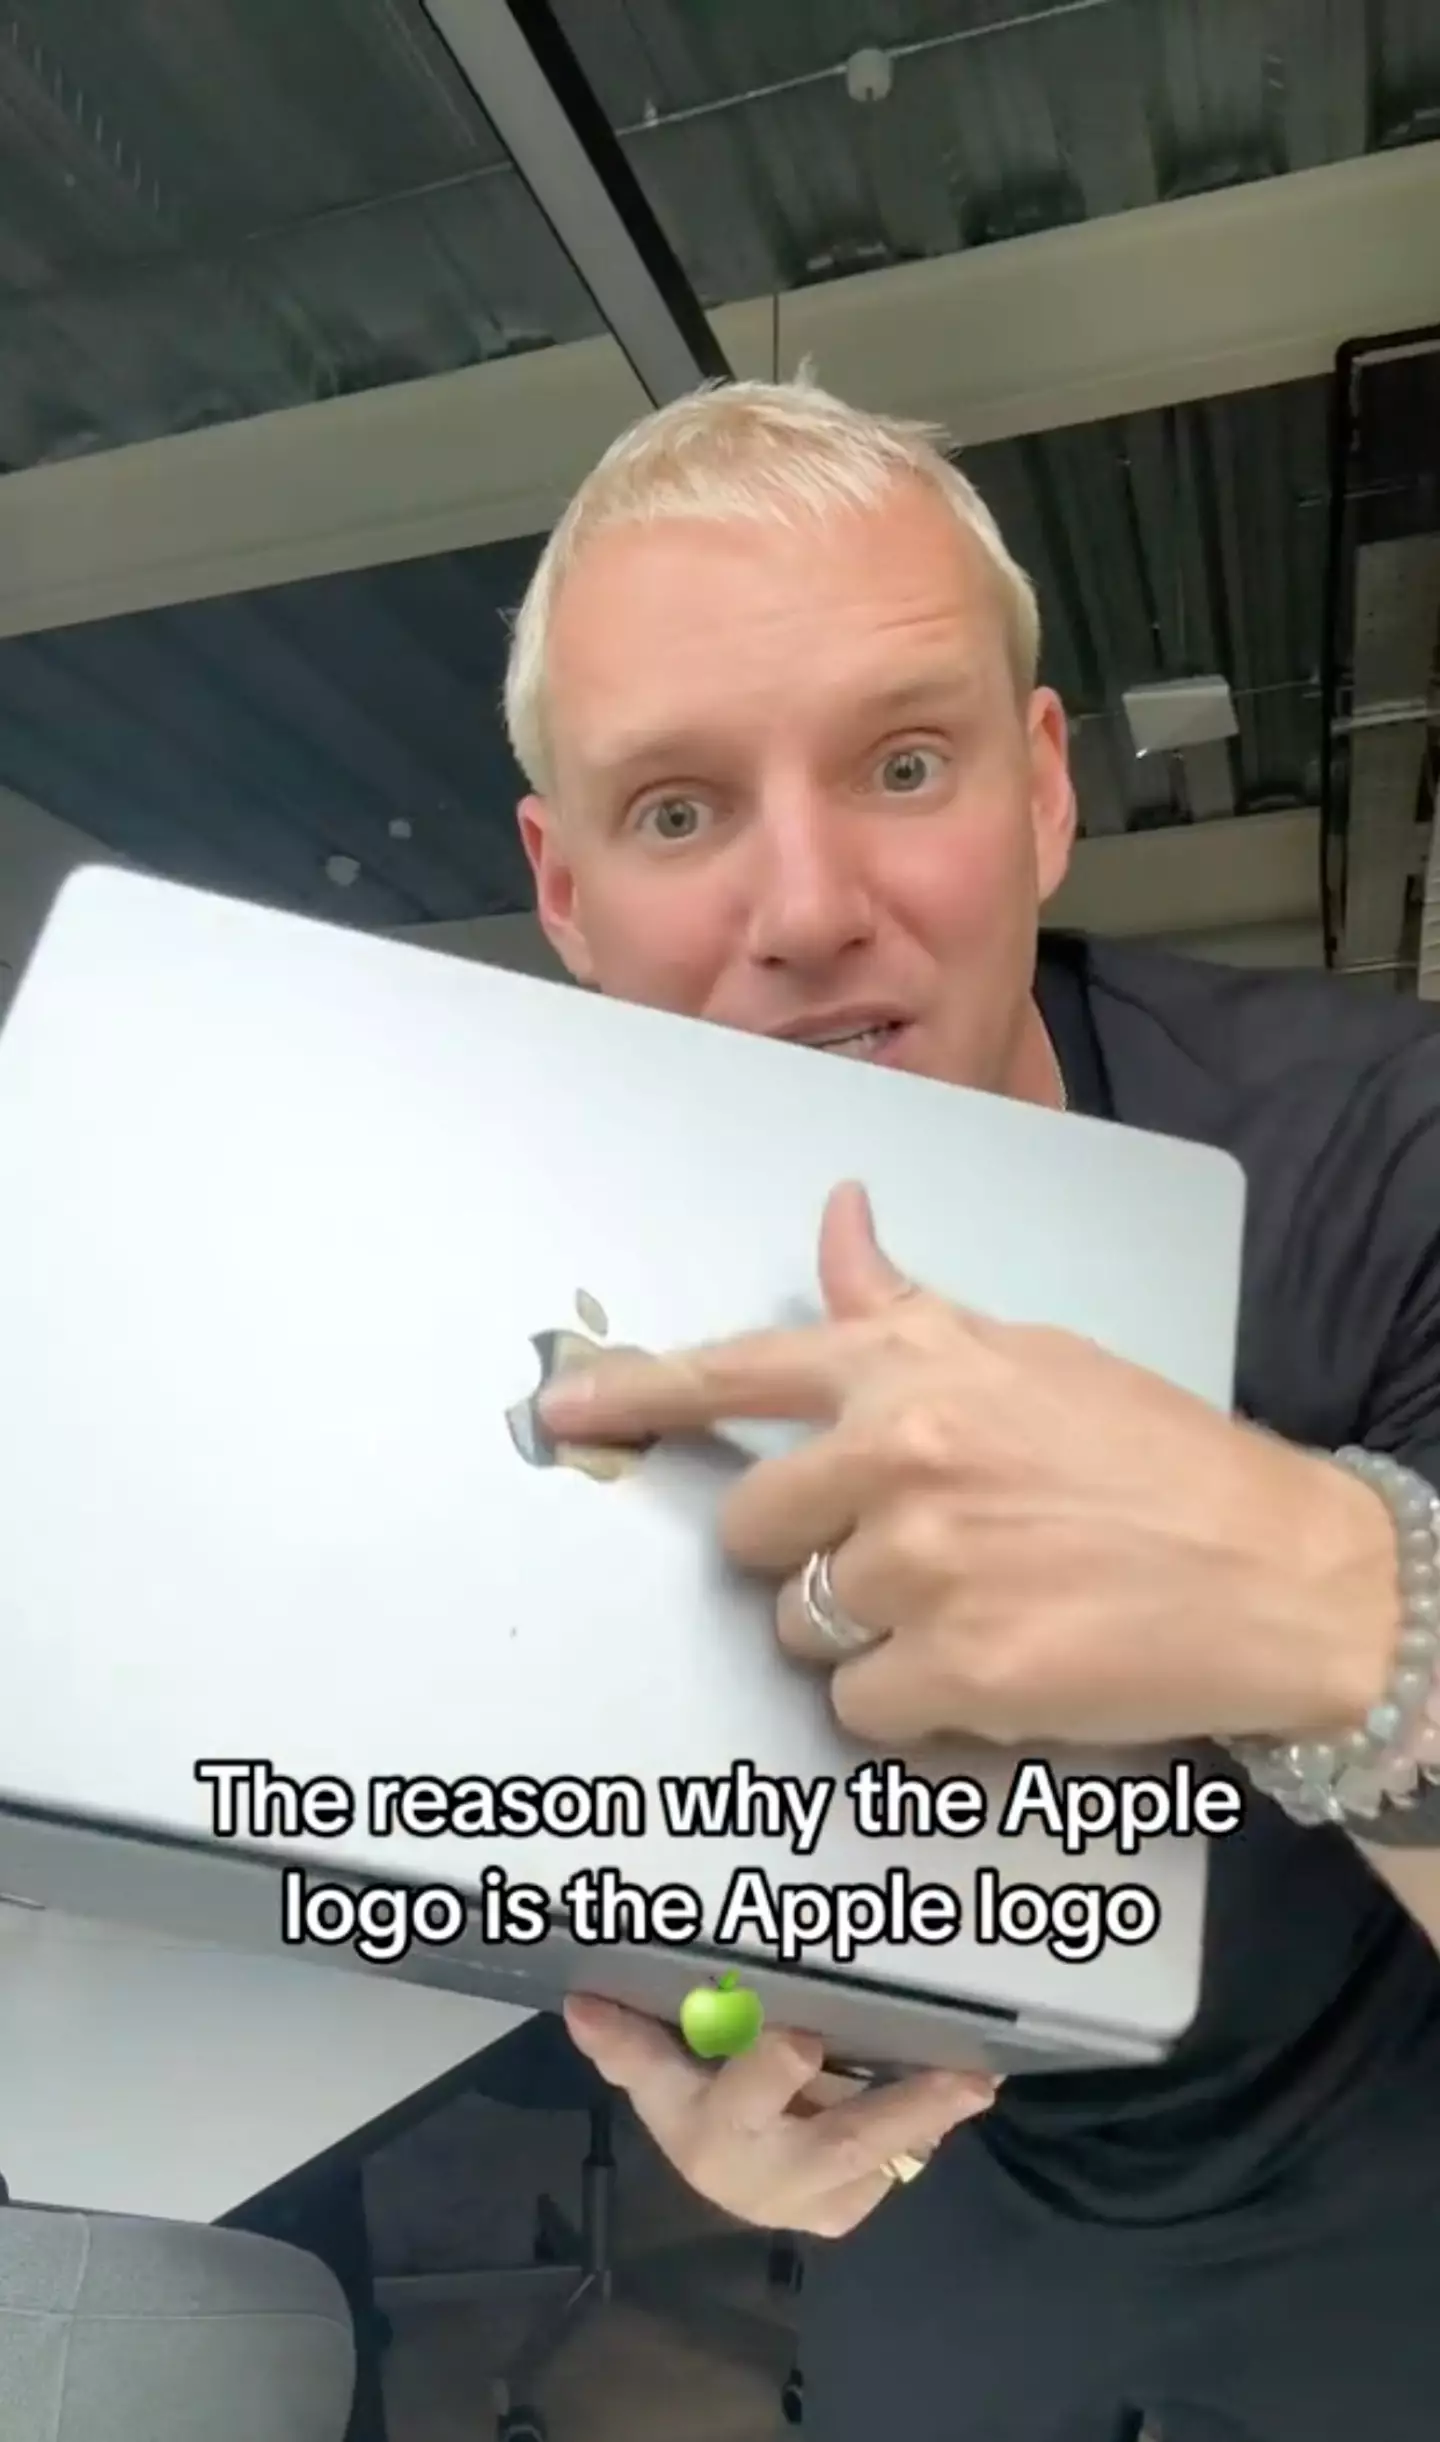 Jamie Laing shared an incredible theory about the origin of the Apple logo.